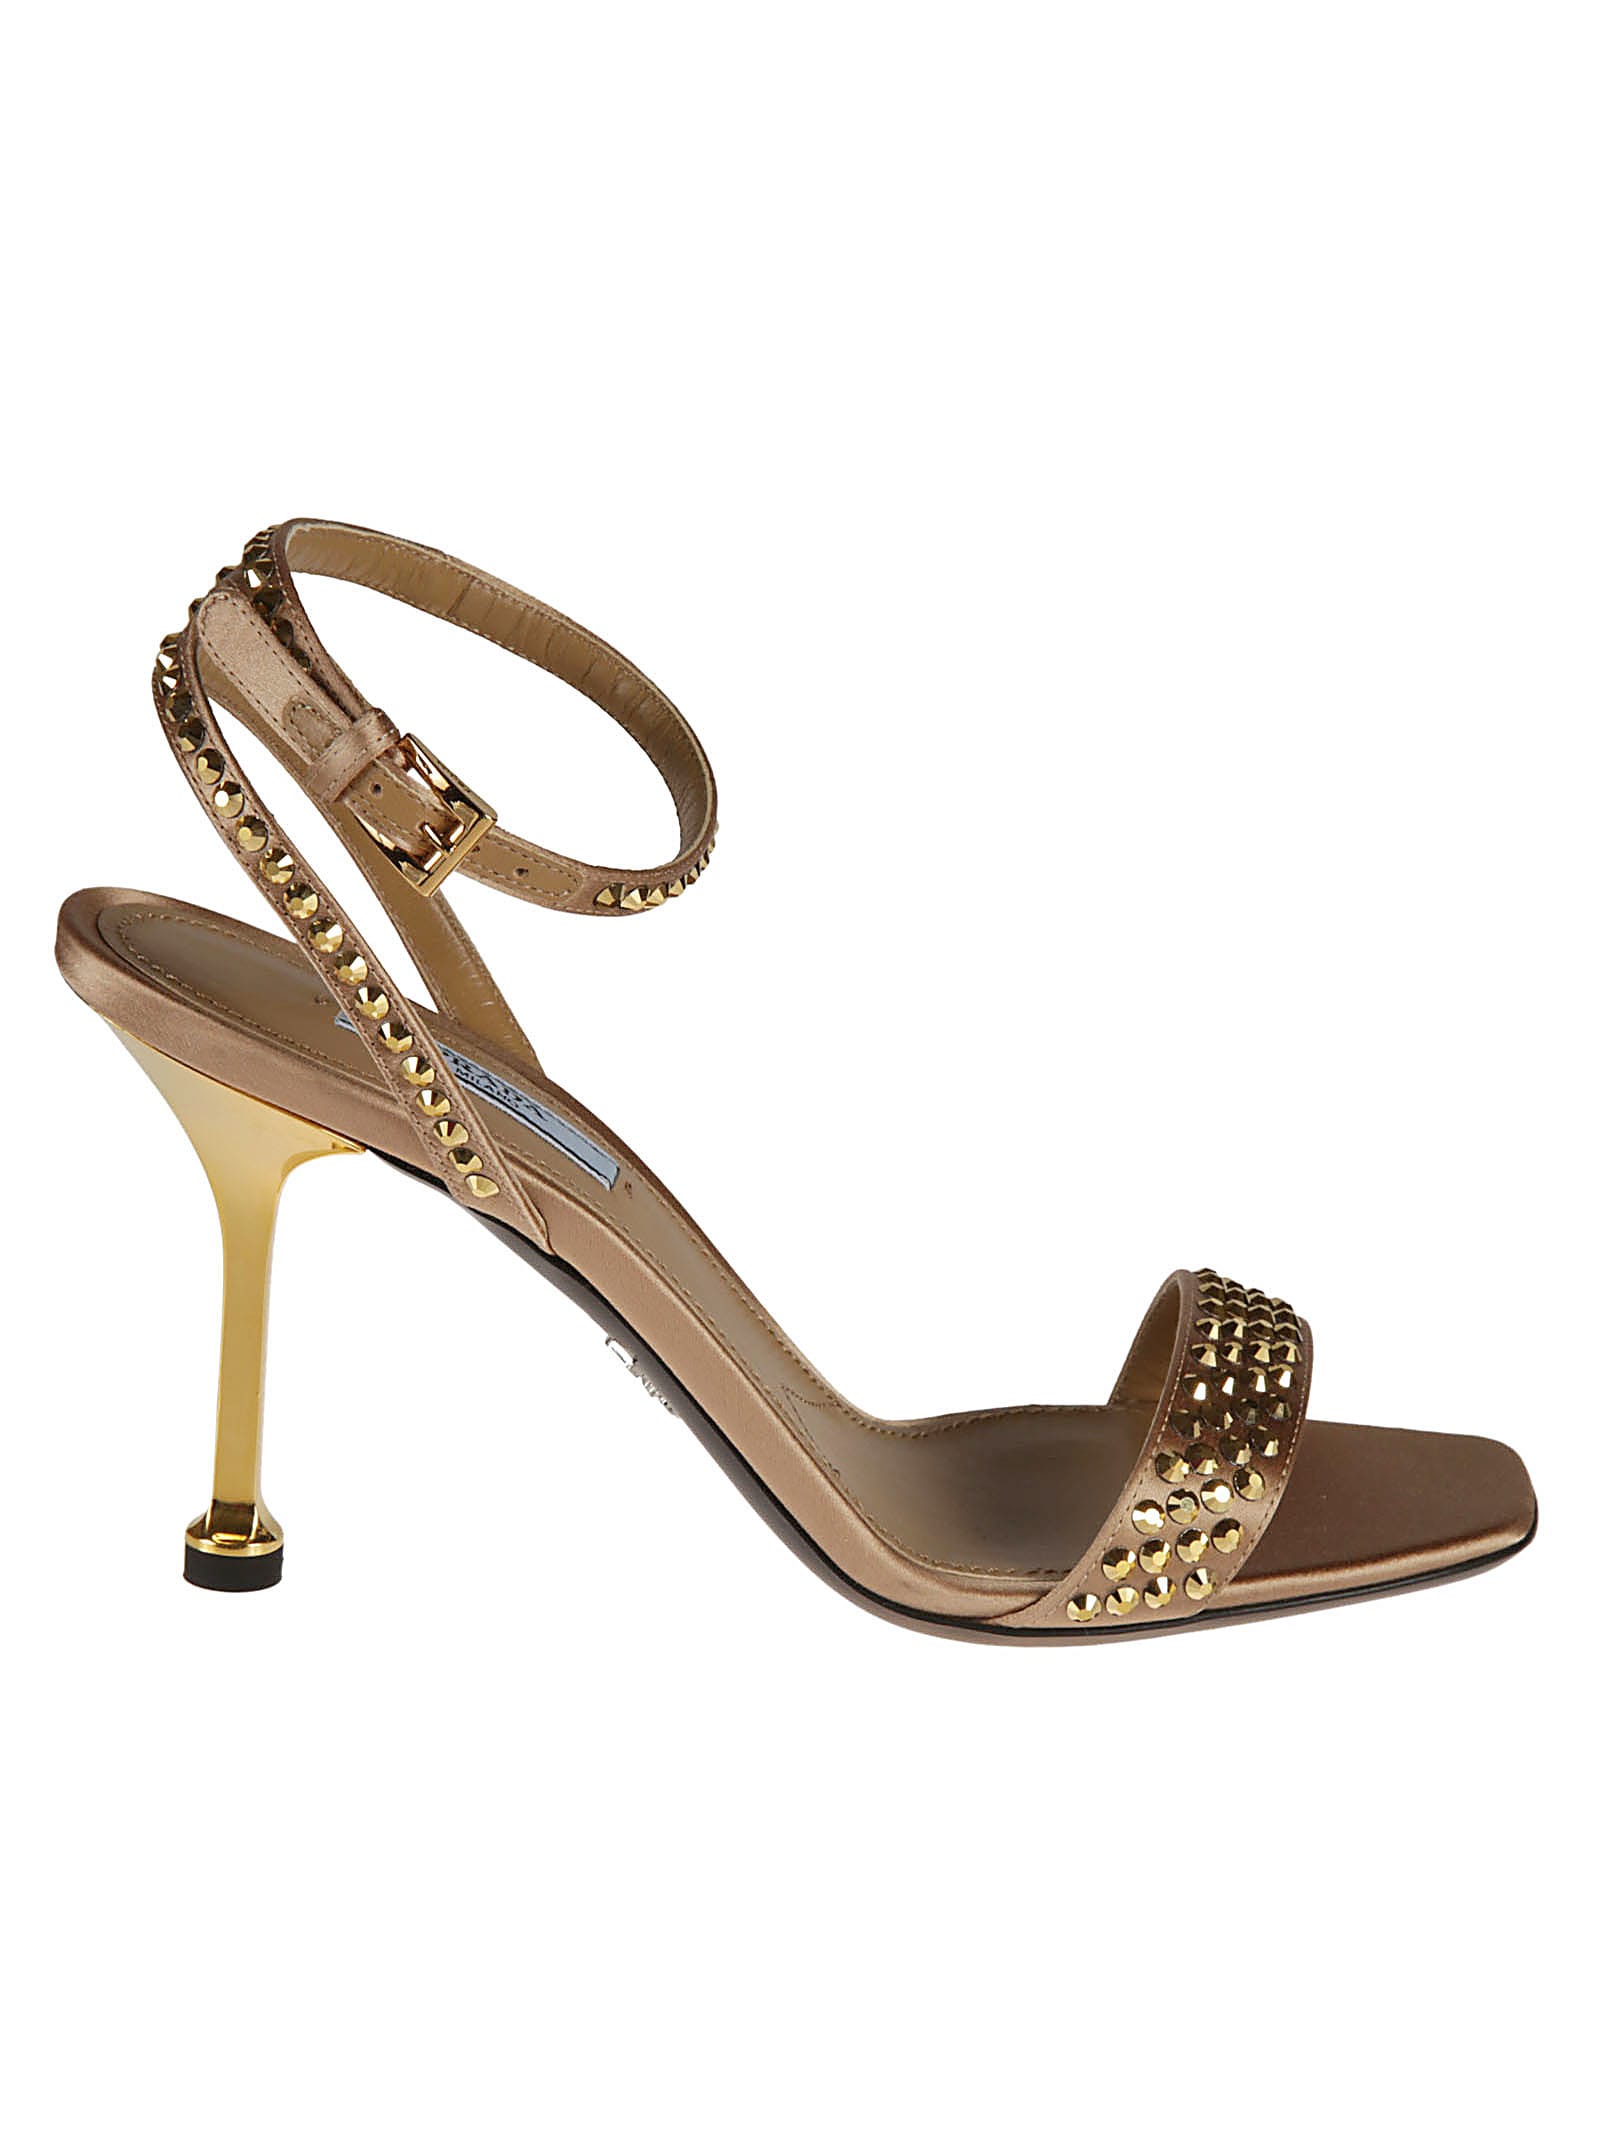 Buy Prada Cristal Sandals online, shop Prada shoes with free shipping